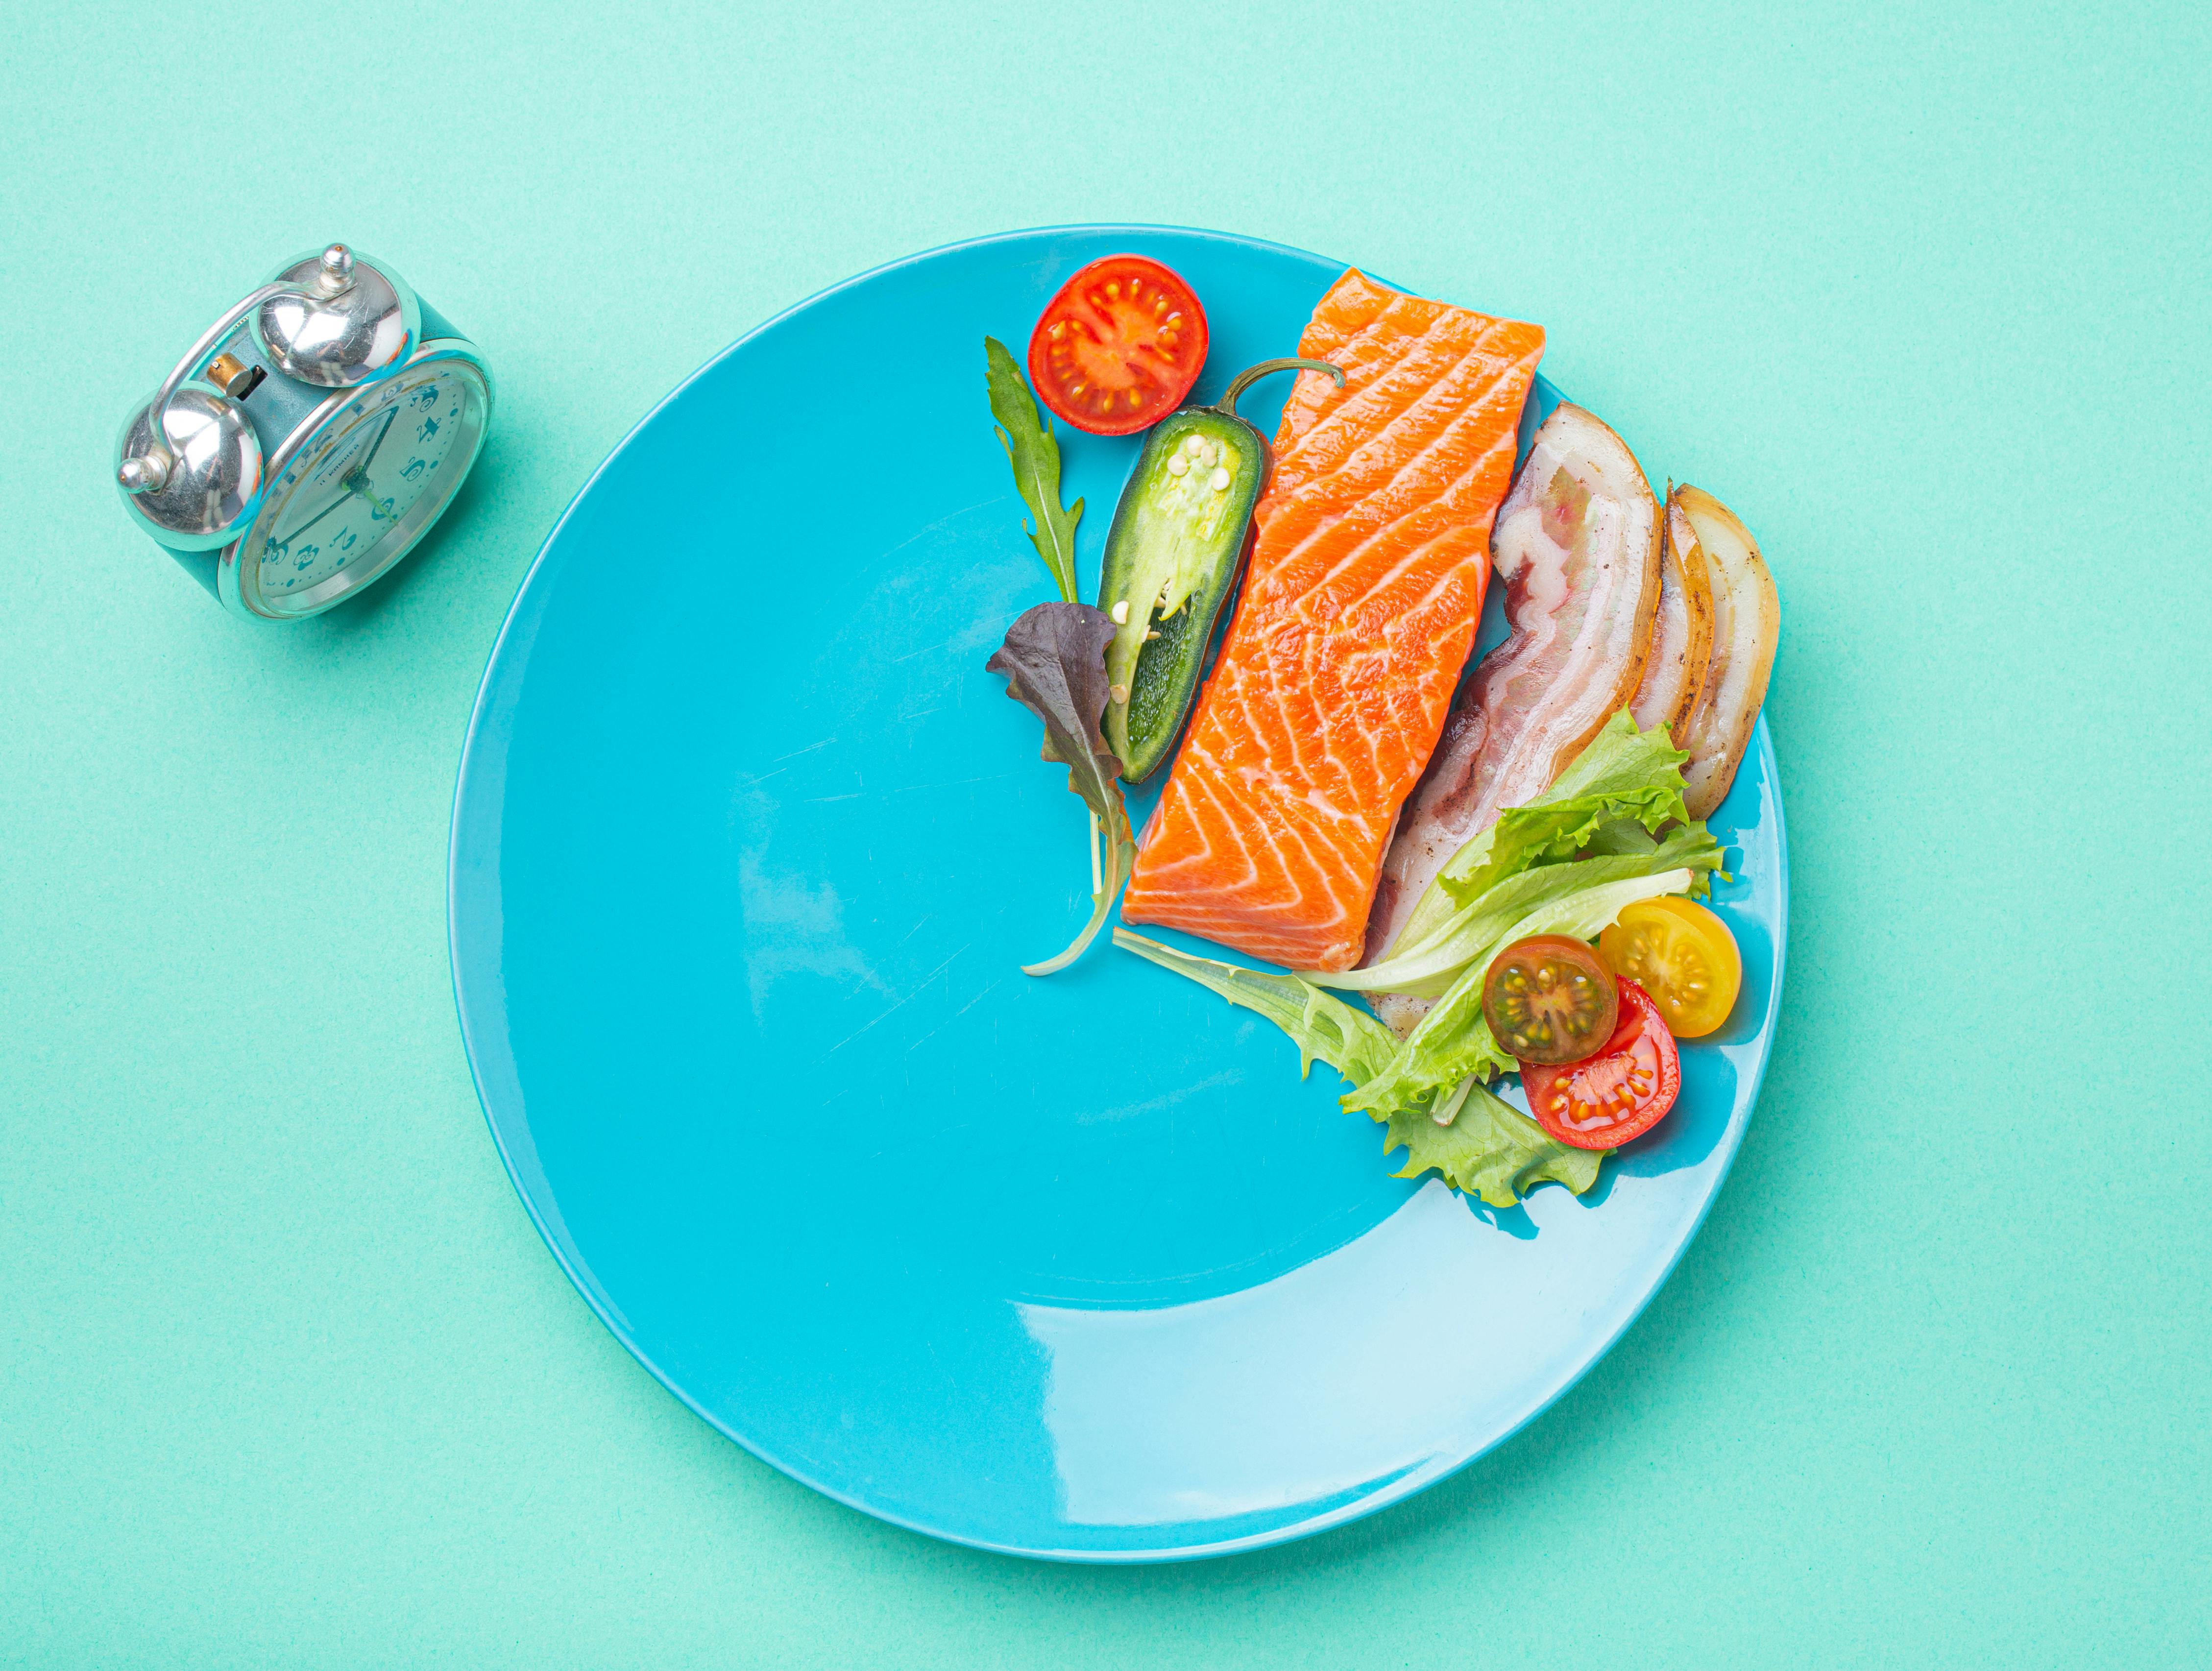 Intermittent fasting low carb hight fats diet concept flat lay, healthy food salmon fish, bacon meat, vegetables and salad on blue plate and clock alarm on blue background top view